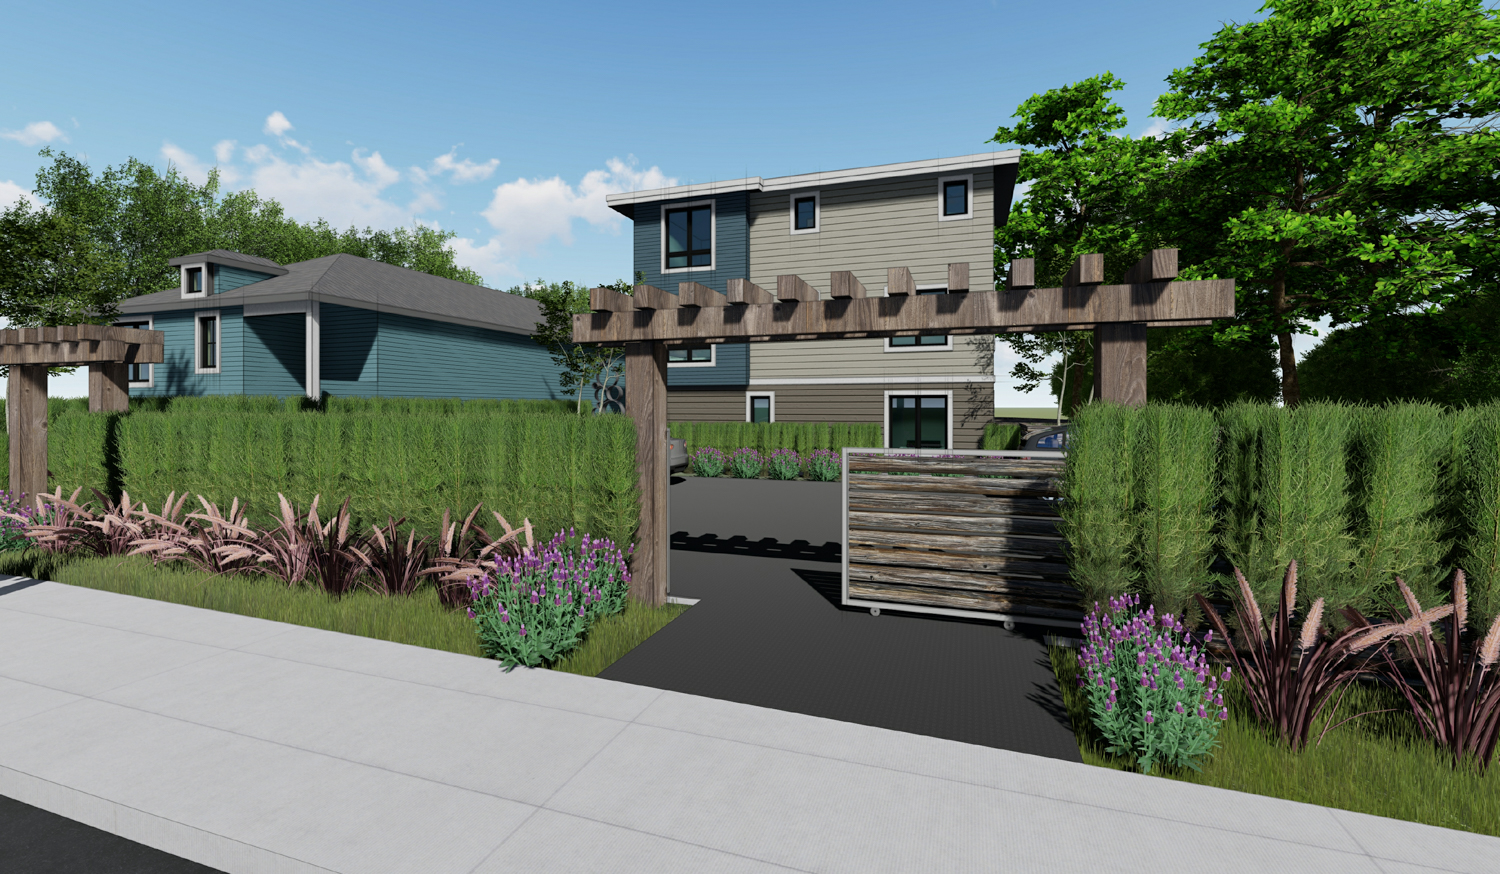 5527 Vicente Way view of the garage entry, rendering by Left Coast Architecture